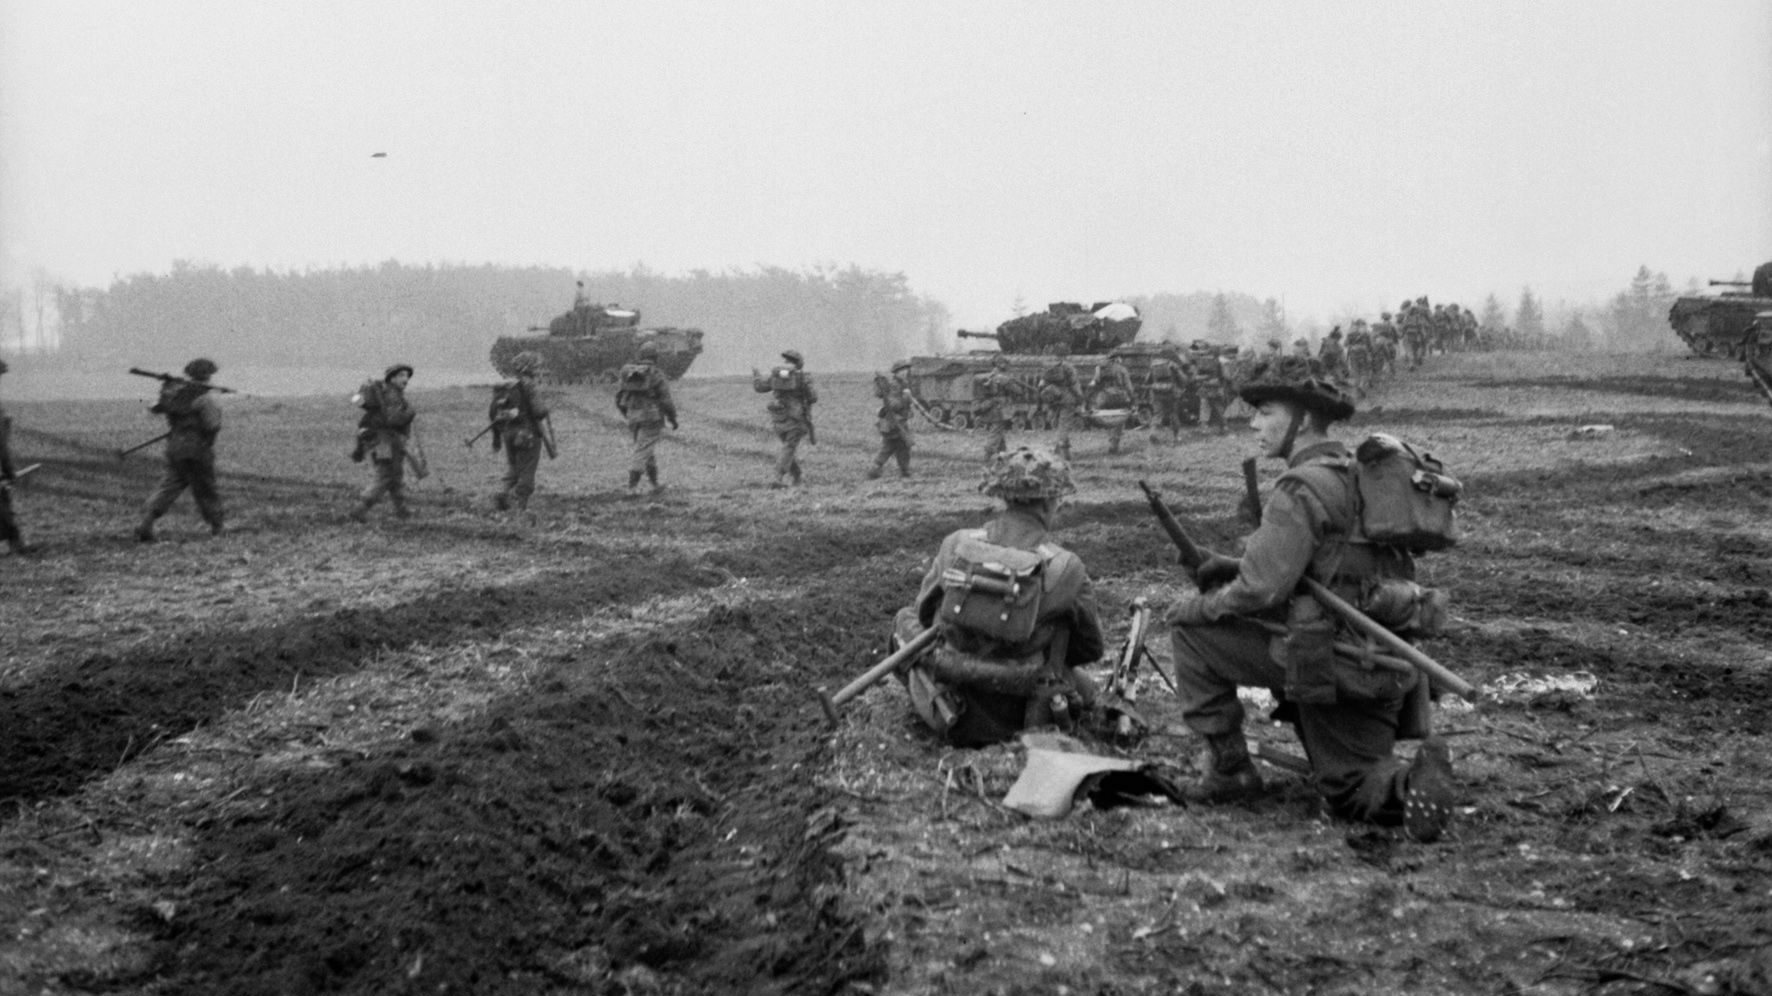 British Churchill tanks support the advance of infantrymen of the 2nd Argyll and Sutherland Highlanders on February 8, 1945. The British advance into the Reichswald was agonizingly slow, and casualties were heavy as the effort to reach the Ruhr bogged down against heavy German resistance.